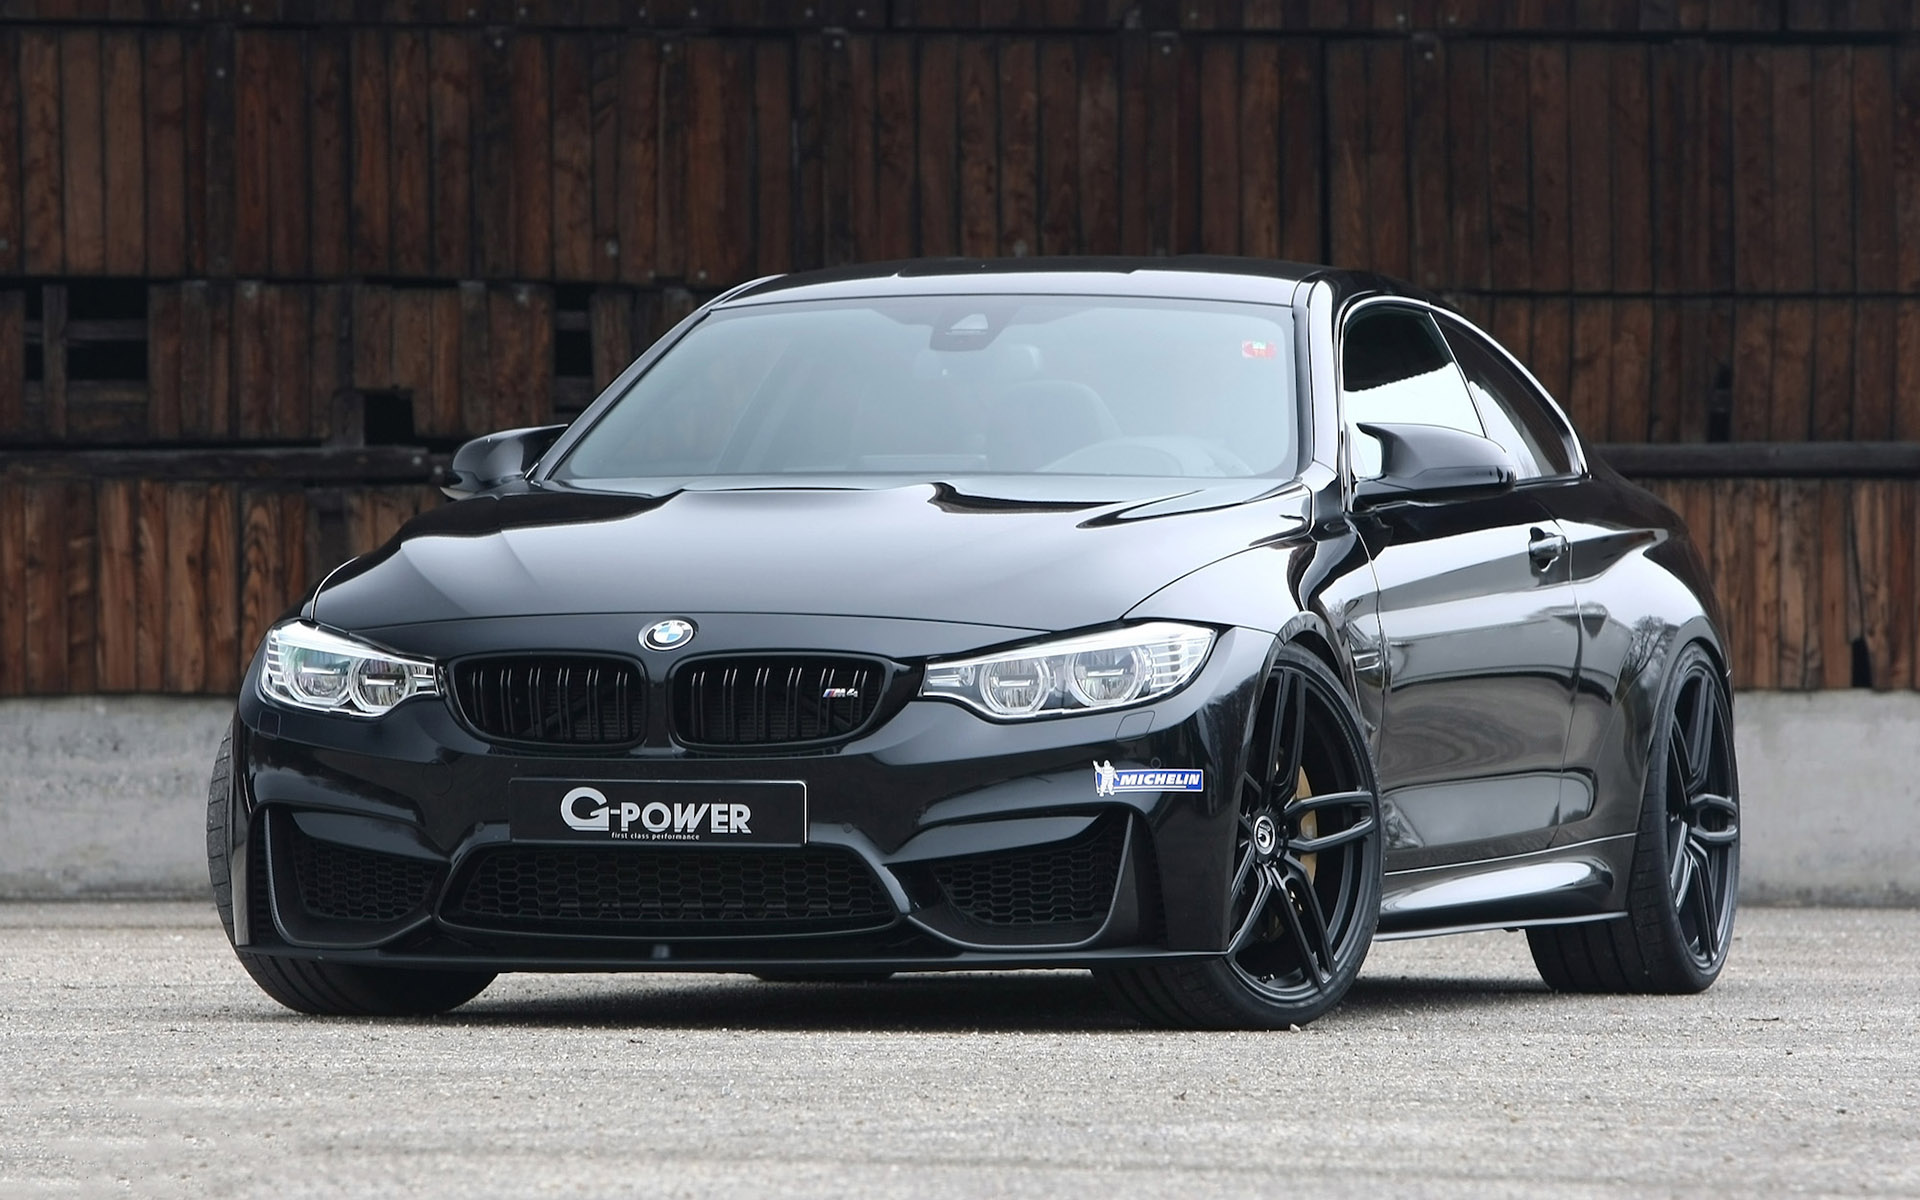 Black BMW M4 Wallpaper Full HD Pictures